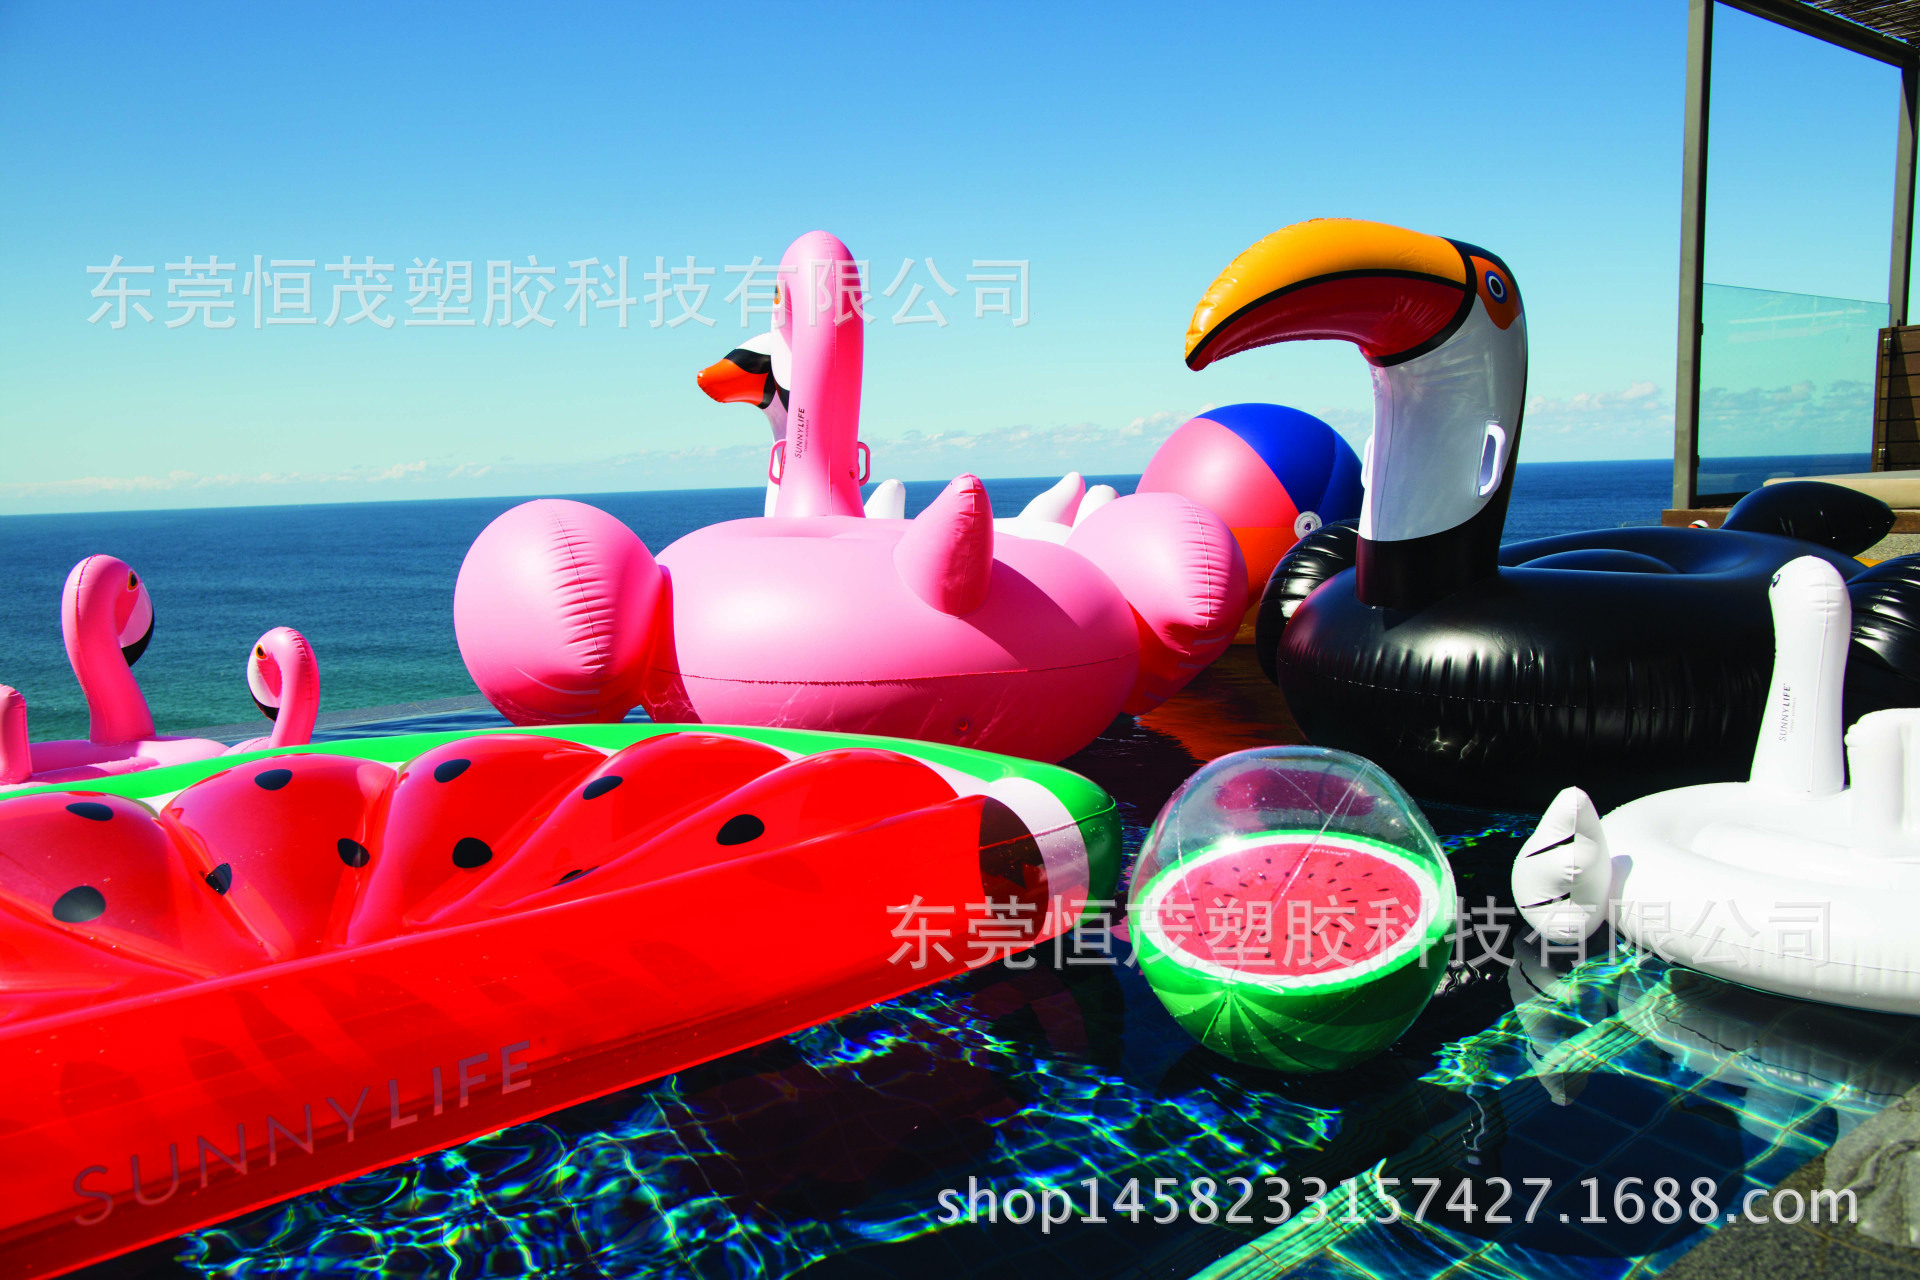 sulbalwg_inflatable-watermelon.